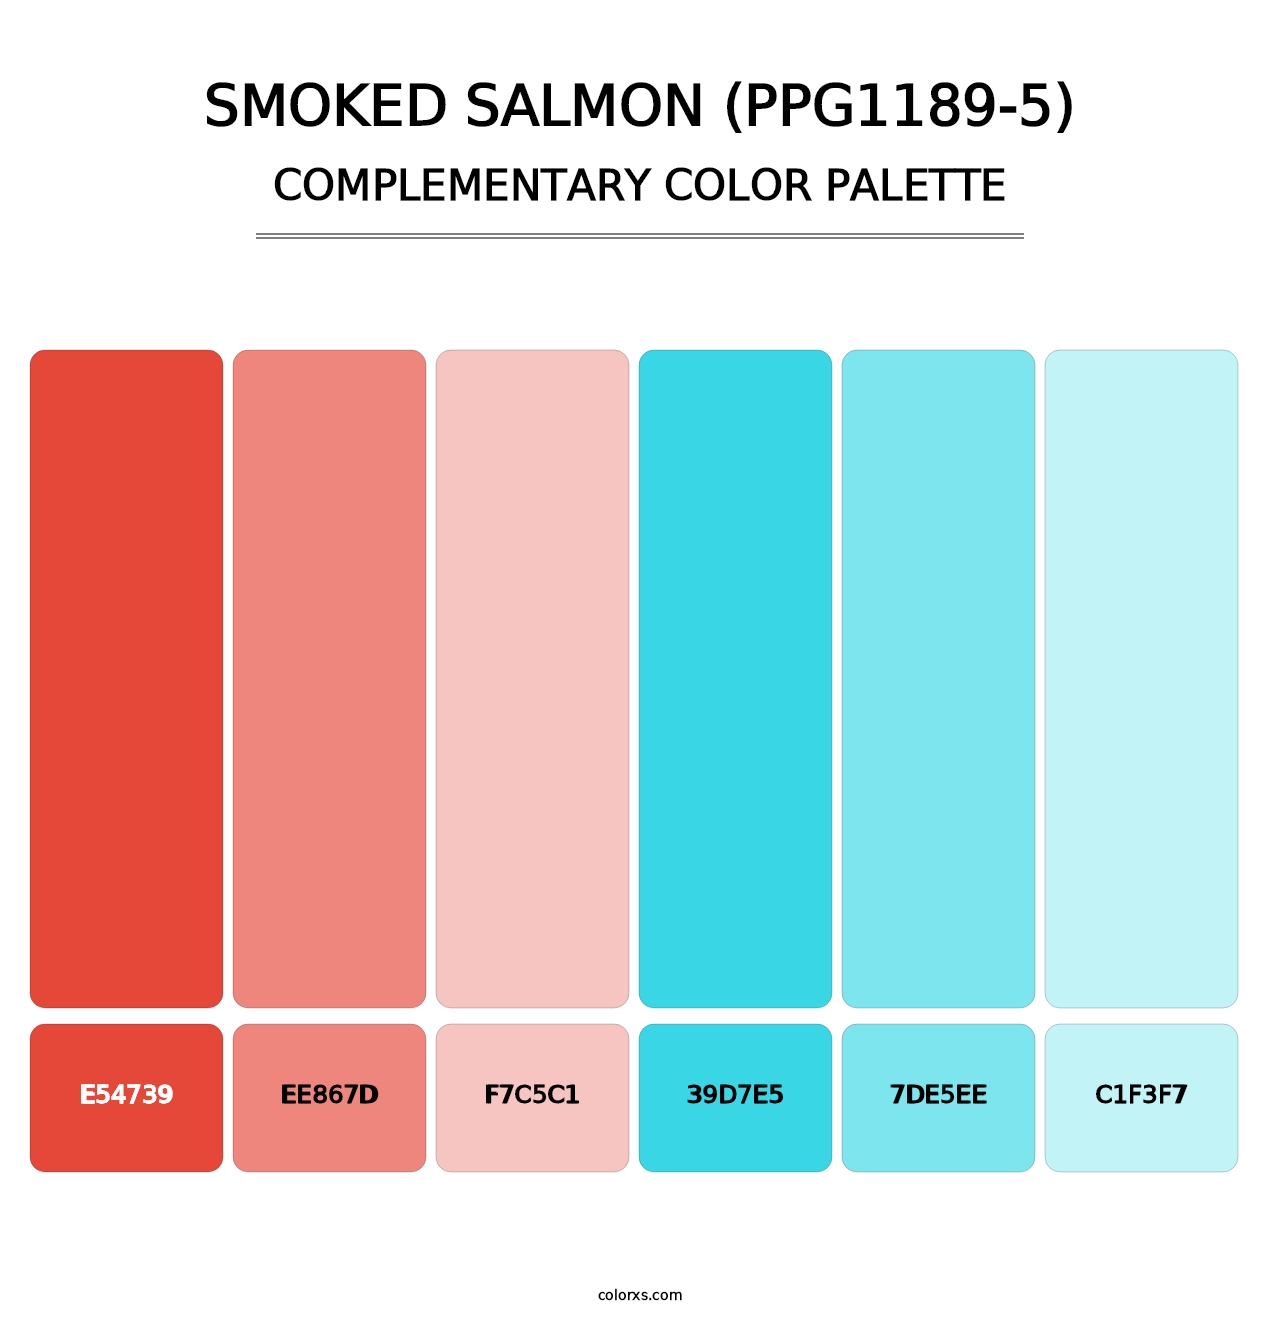 Smoked Salmon (PPG1189-5) - Complementary Color Palette